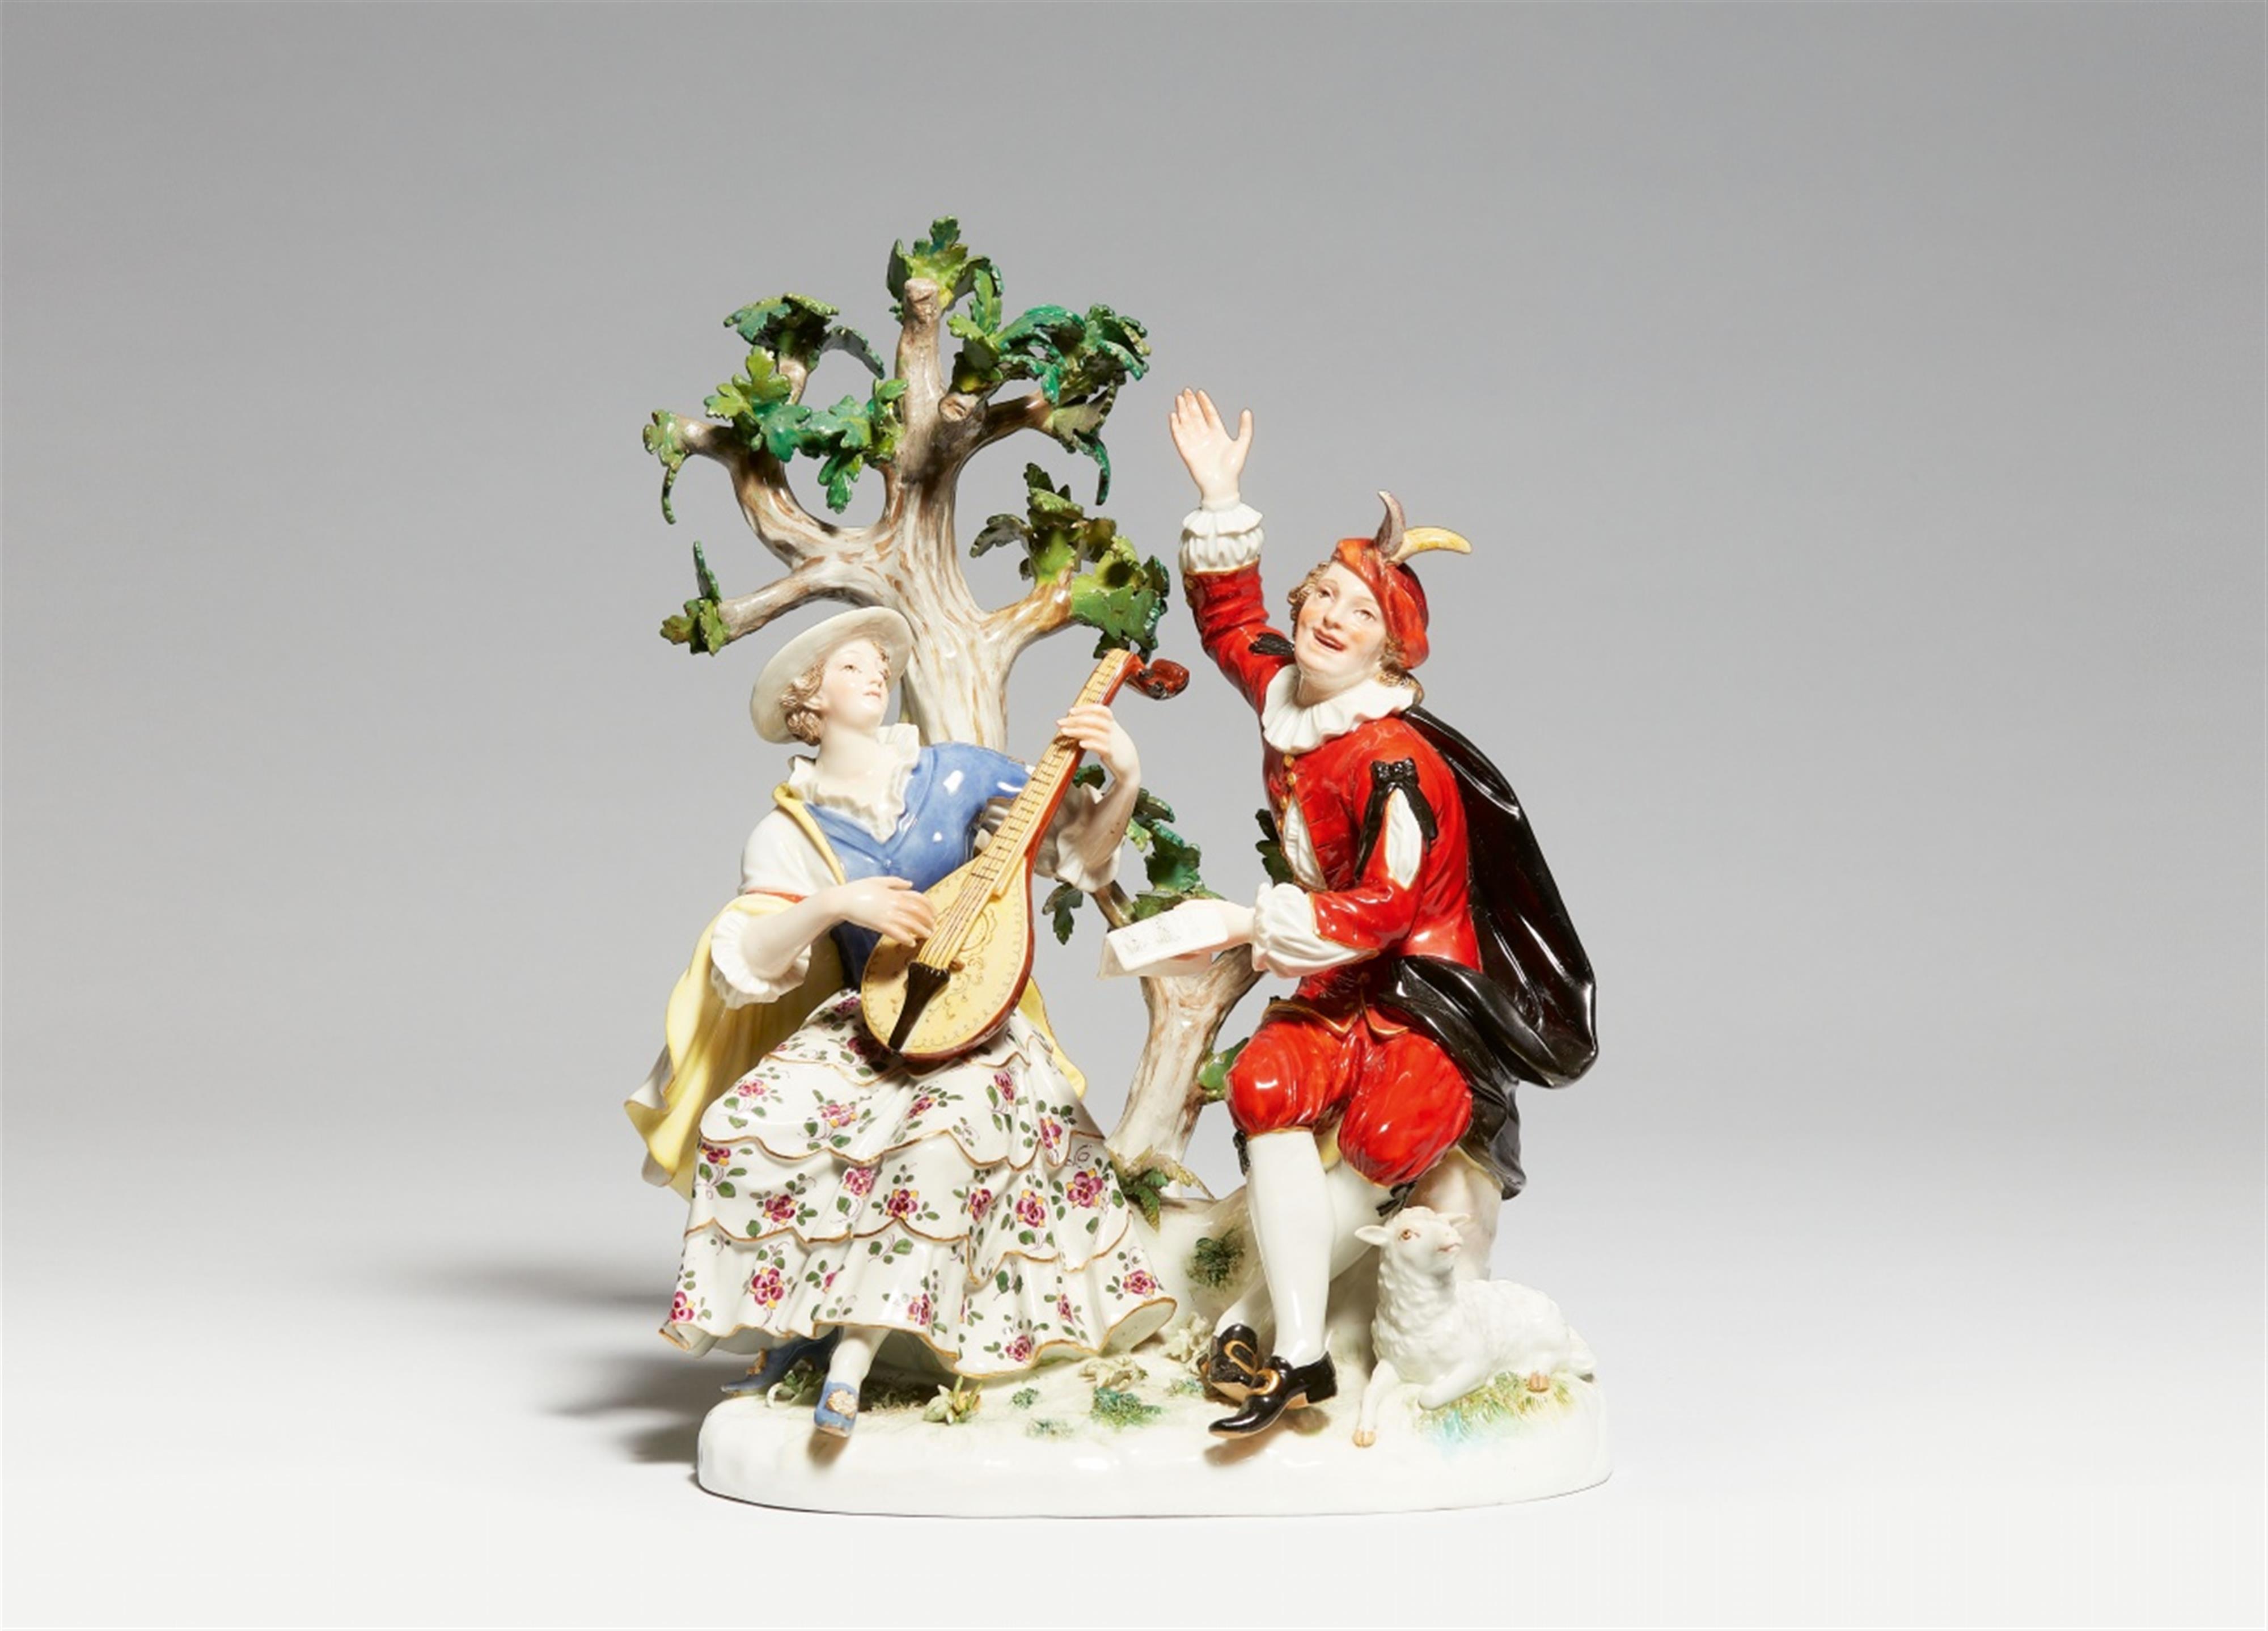 A Meissen porcelain group of shepherds by a tree - image-1